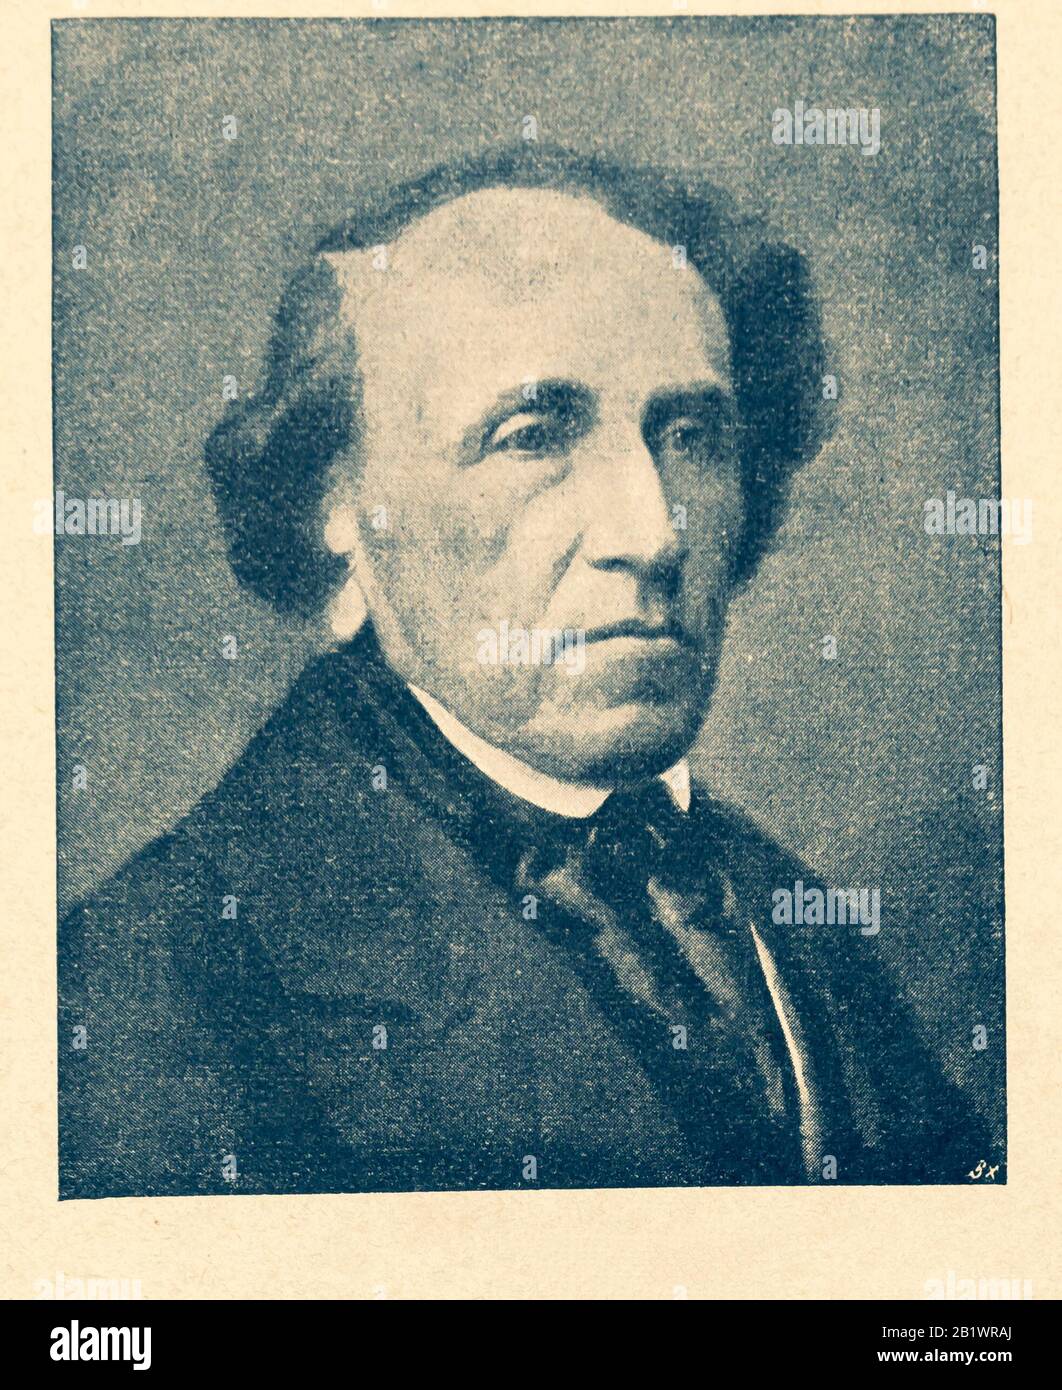 Giacomo Meyerbeer was a German opera composer of Jewish birth . Digital improved reproduction from Illustrated overview of the life of mankind in the 19th century, 1901 edition, Marx publishing house, St. Petersburg Stock Photo